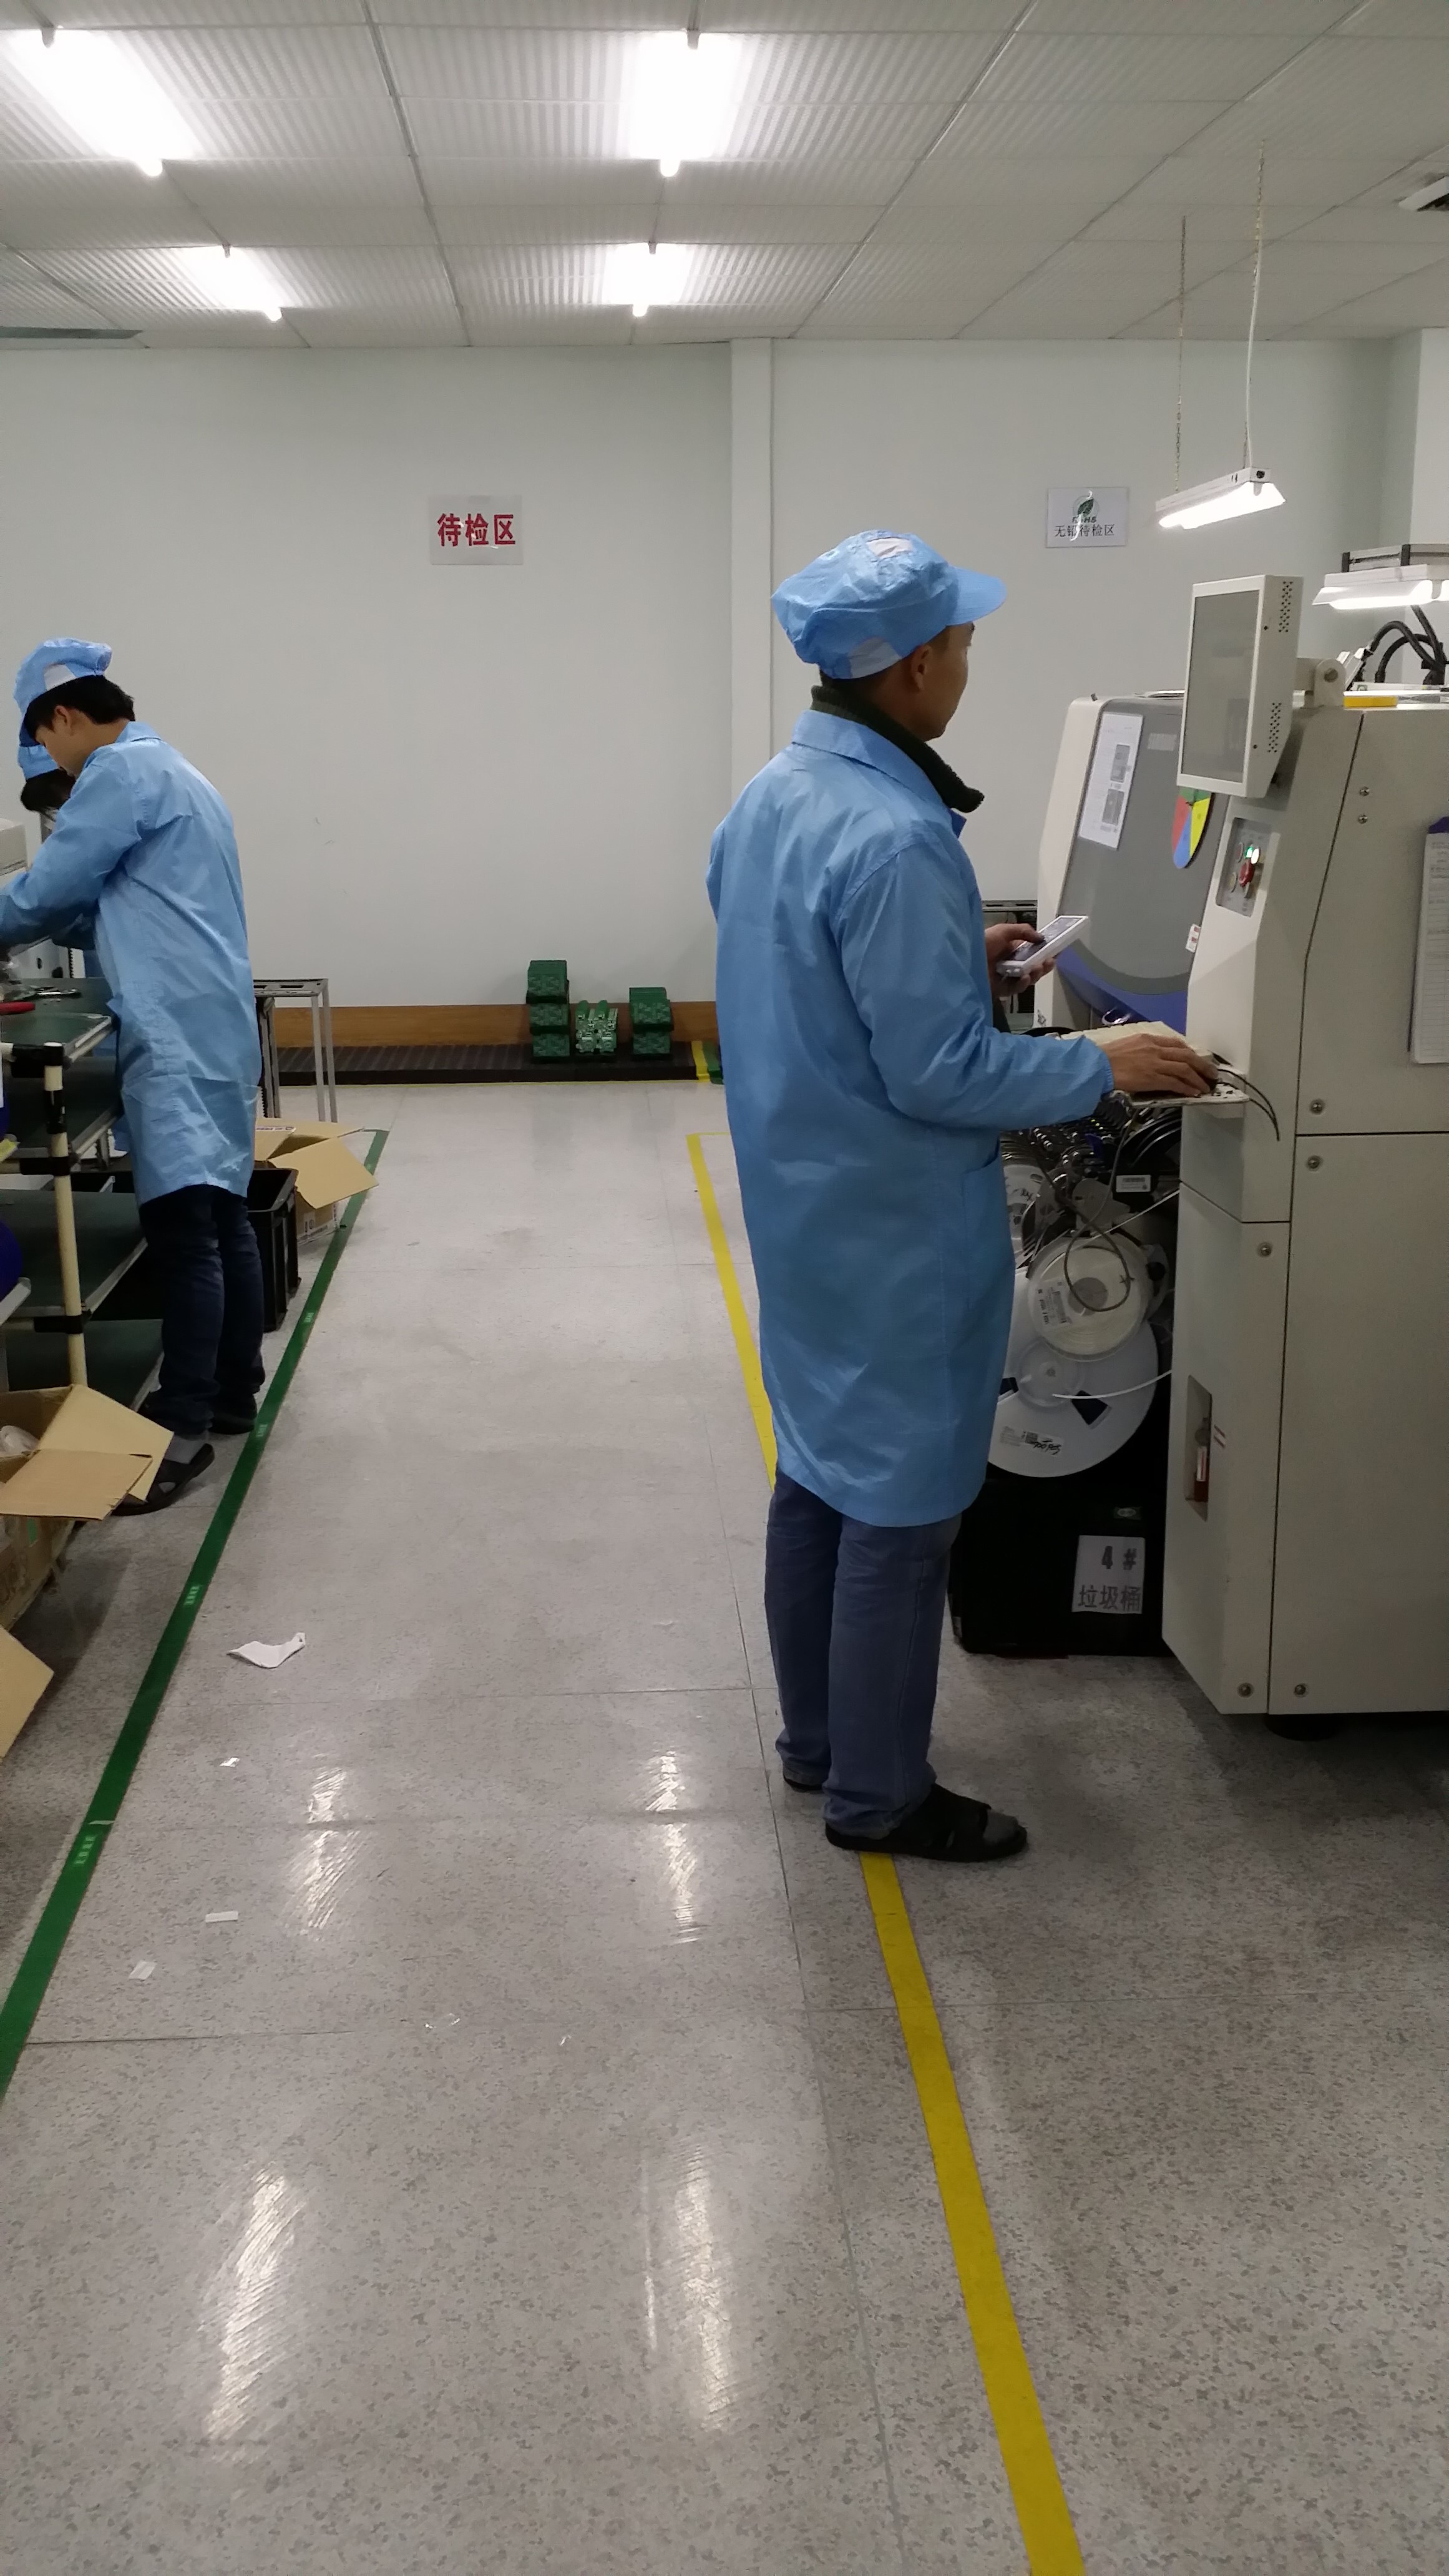 GZ TOPSHINE TECHNOLOGY LIMITED factory production line